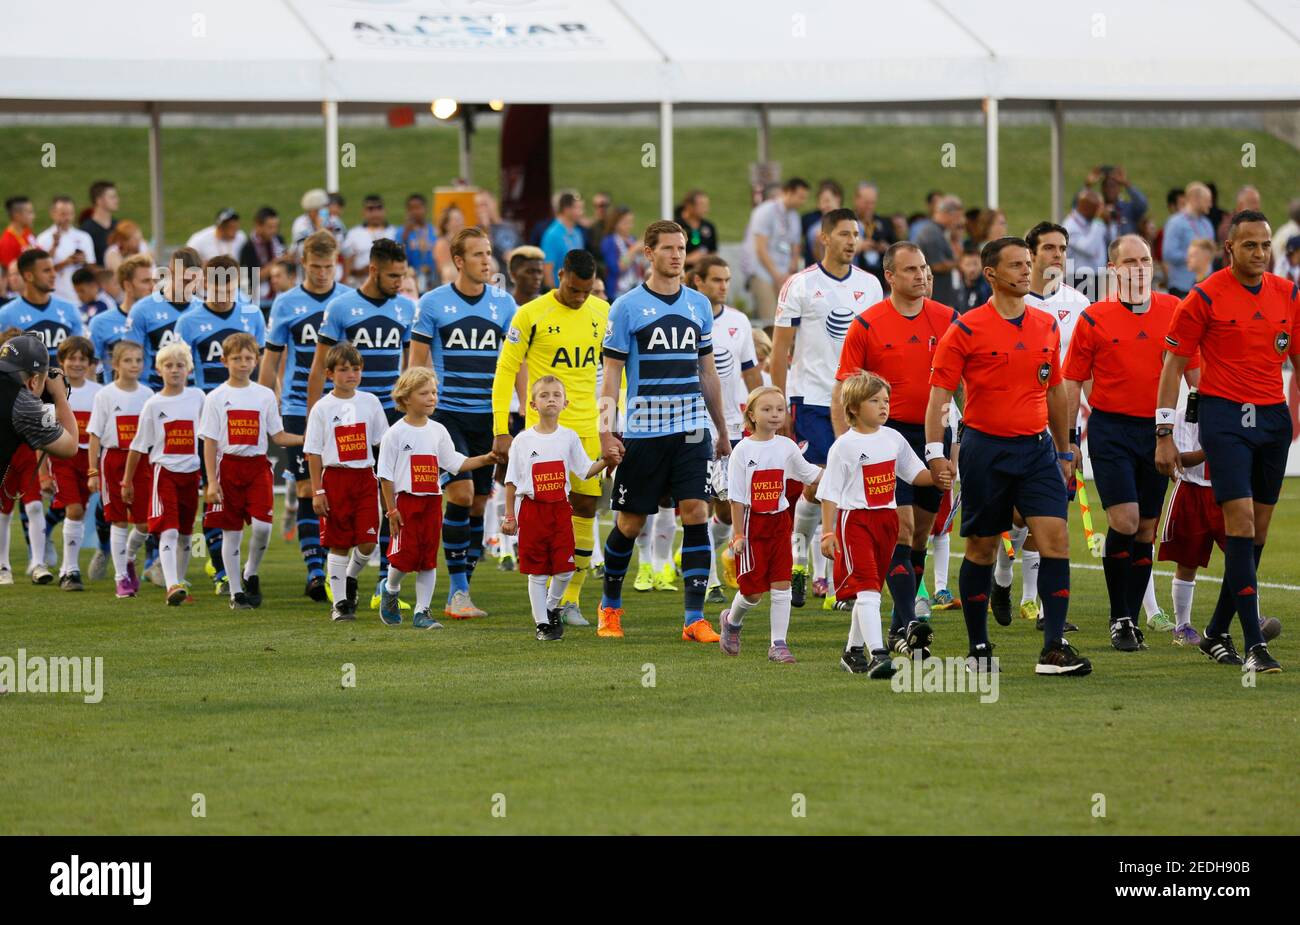 Football - MLS All-Stars v Tottenham Hotspur - AT&T MLS All Stars Game - Pre Season Friendly - Dick's Sporting Goods Park, Colorado, United States of America - 15/16 - 29/7/15  The teams walk out onto the pitch before the game  Action Images via Reuters / Rick Wilking Stock Photo